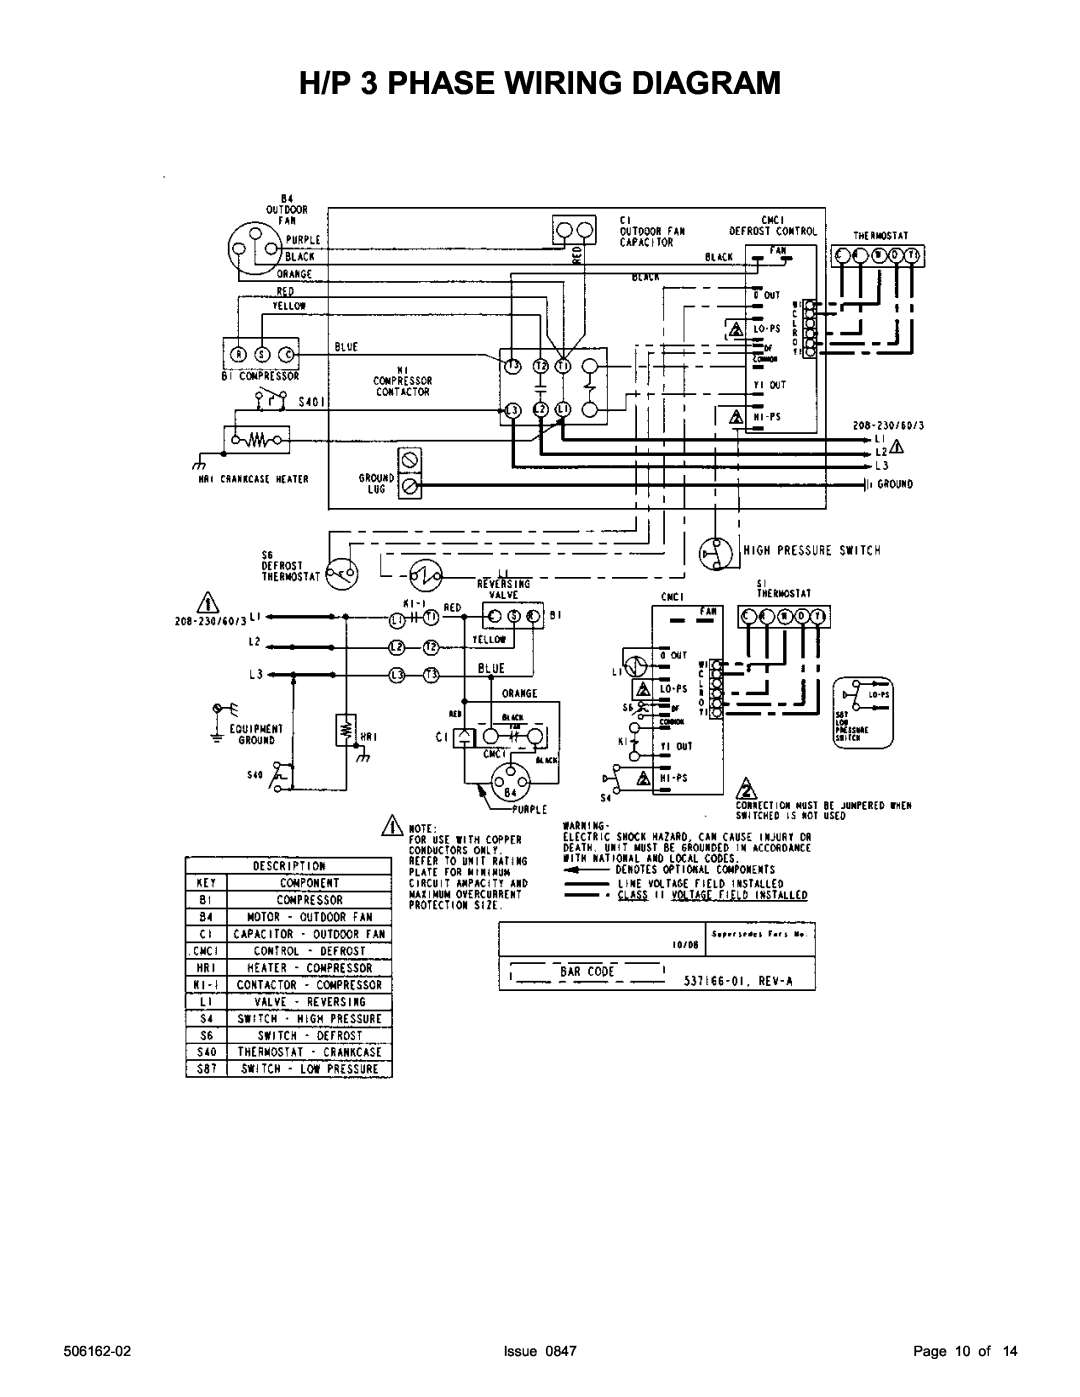 Ducane (HVAC) 2HP13/14 warranty H/P 3 PHASE WIRING DIAGRAM, Issue, Page 10 of, 506162-02 